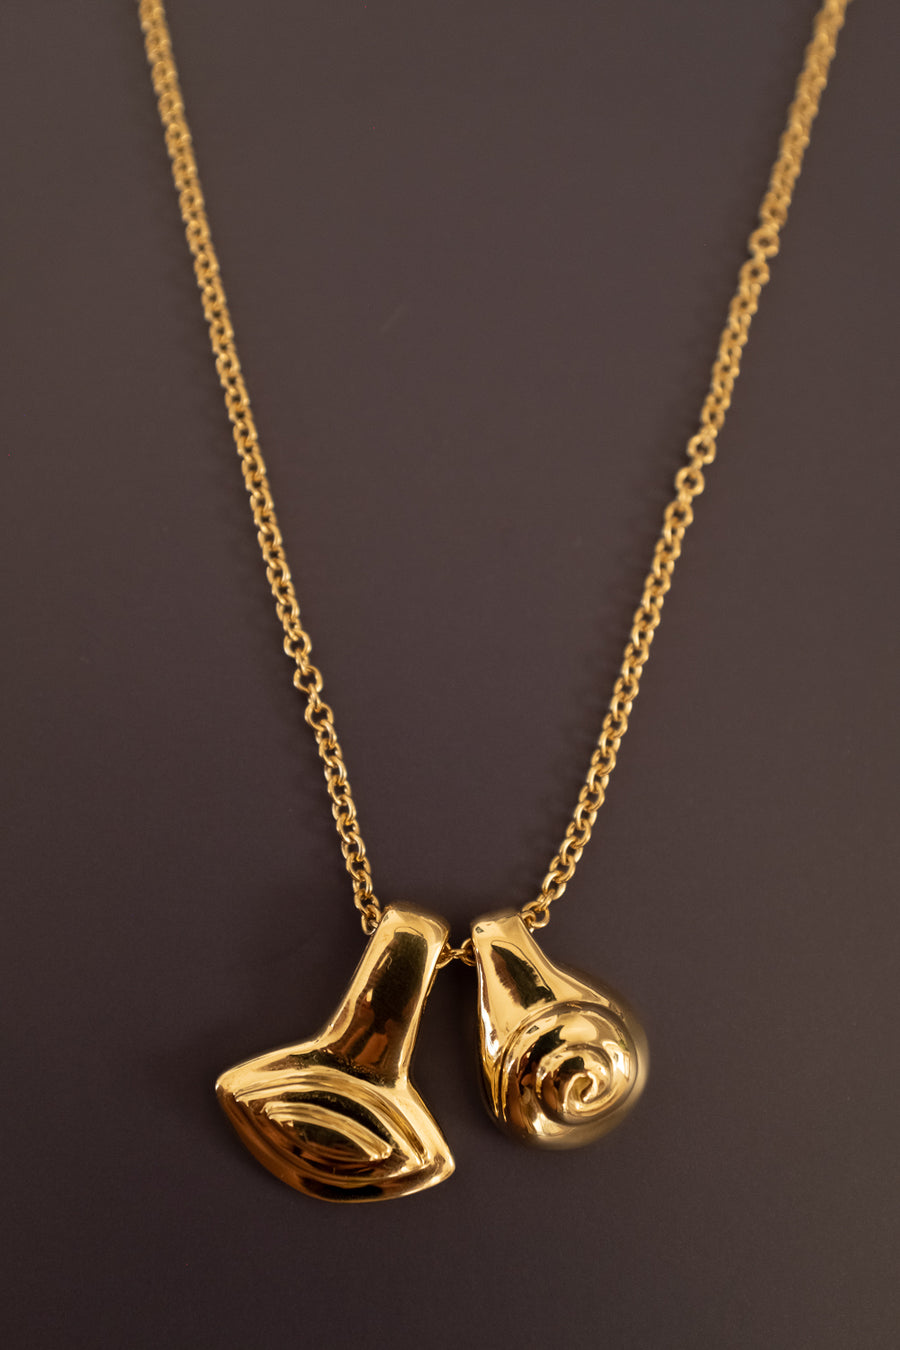 18k Caracol Amulet Necklace in Fairmined Gold